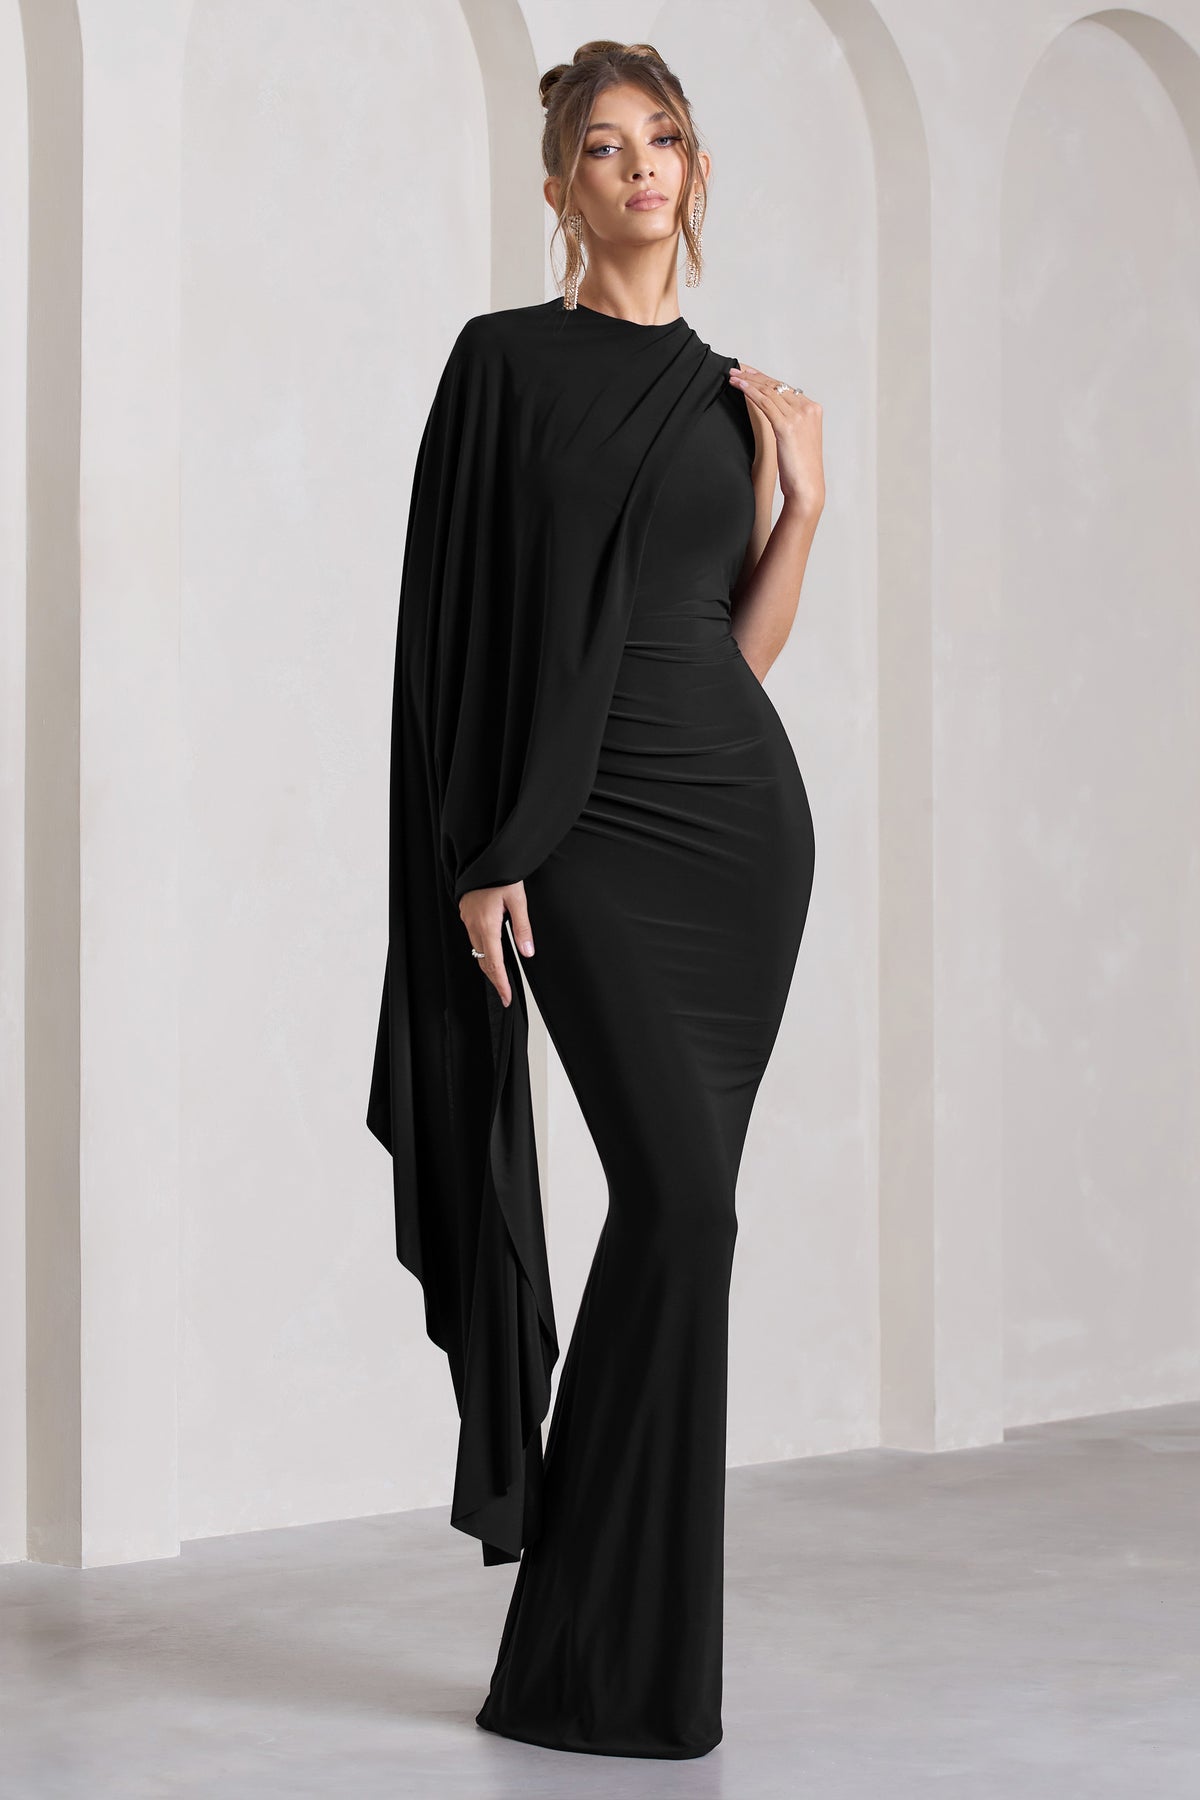 Buy Ivy Cape Maxi Dress - Forever New